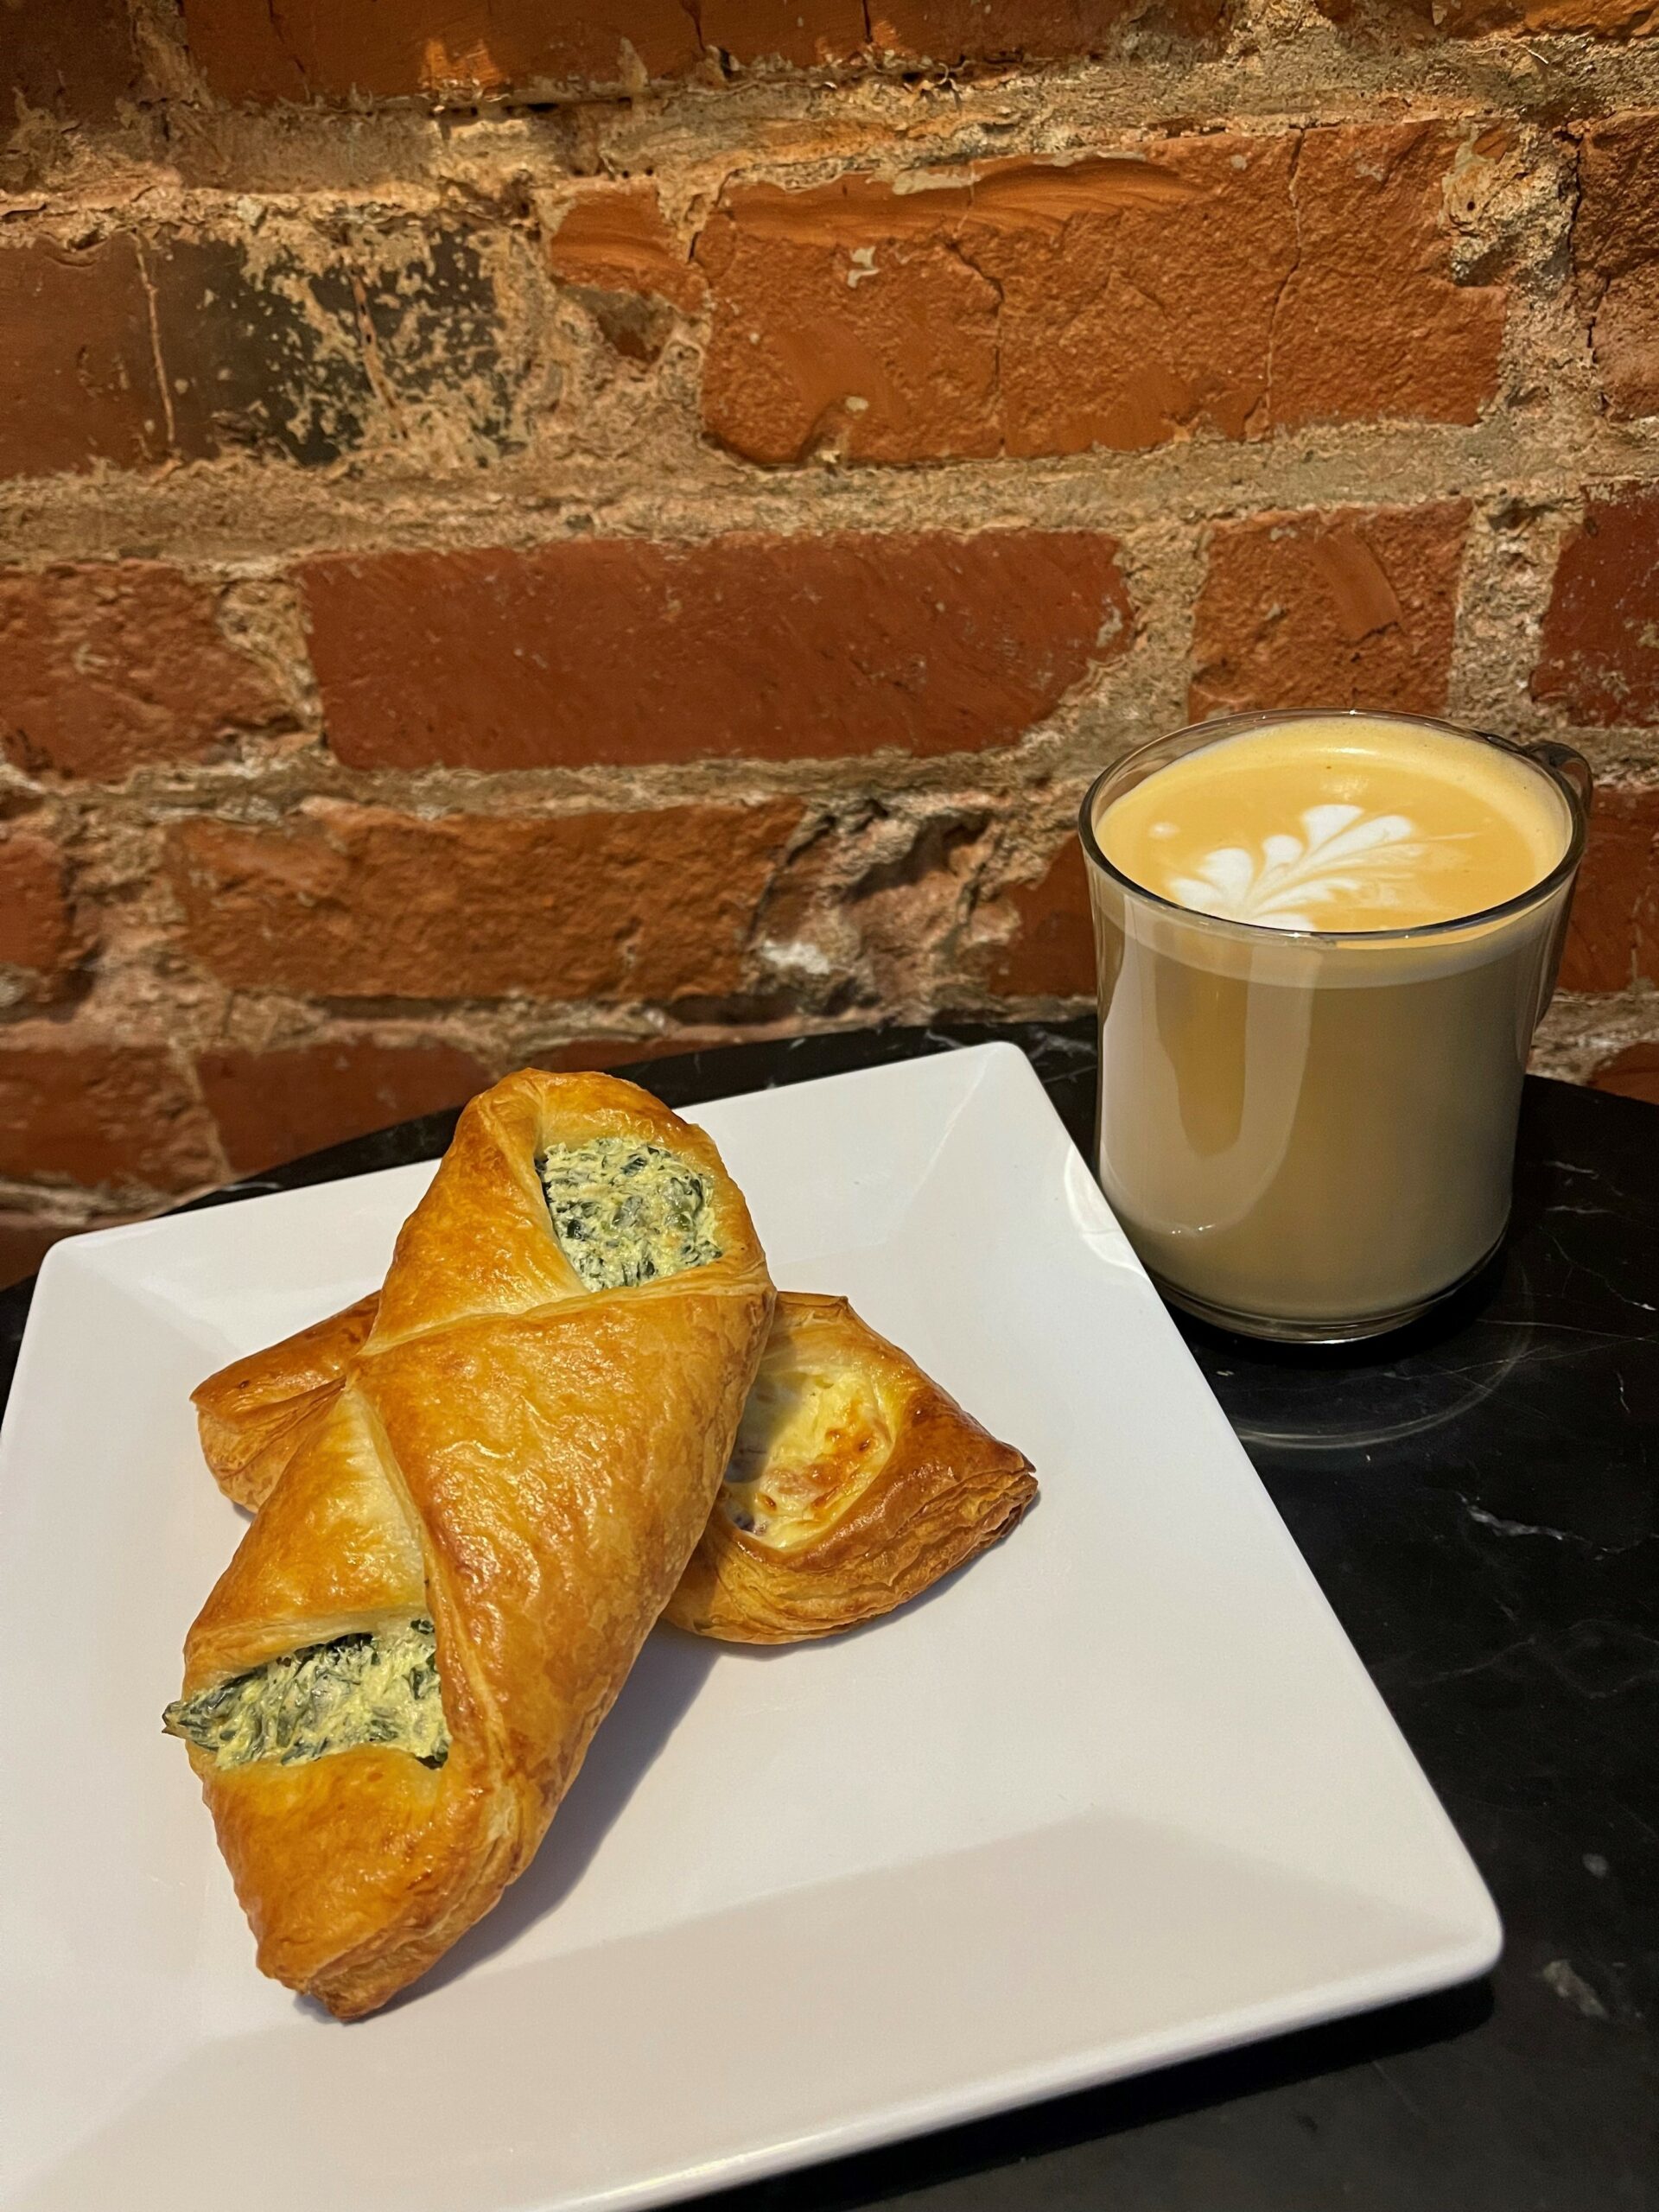 Croissant and Coffee